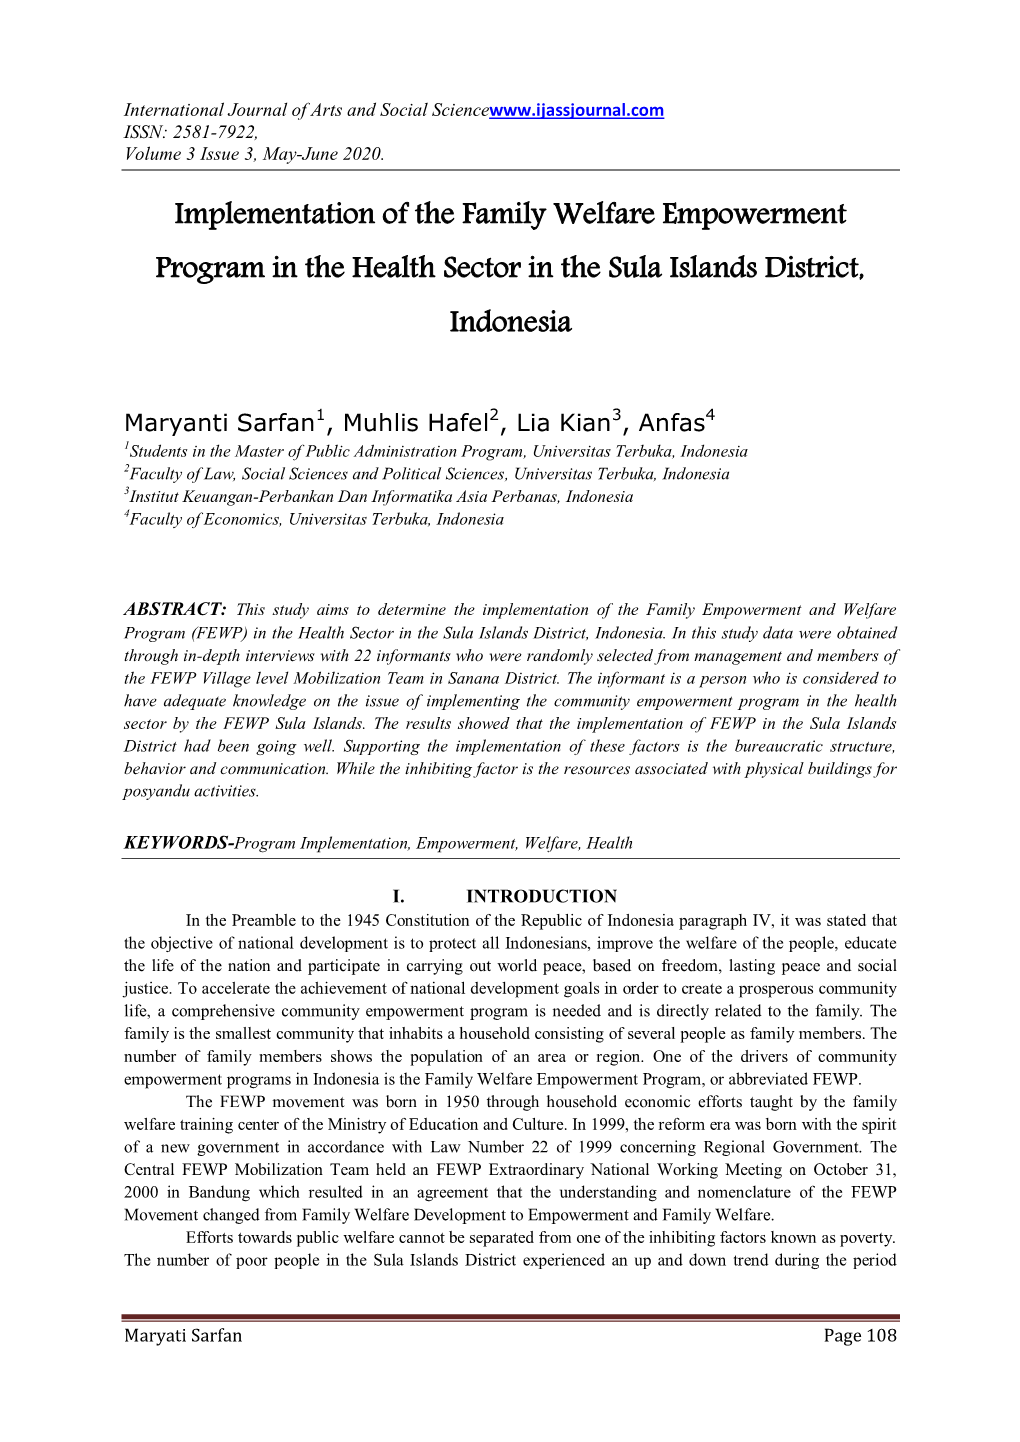 Implementation of the Family Welfare Empowerment Program in the Health Sector in the Sula Islands District, Indonesia